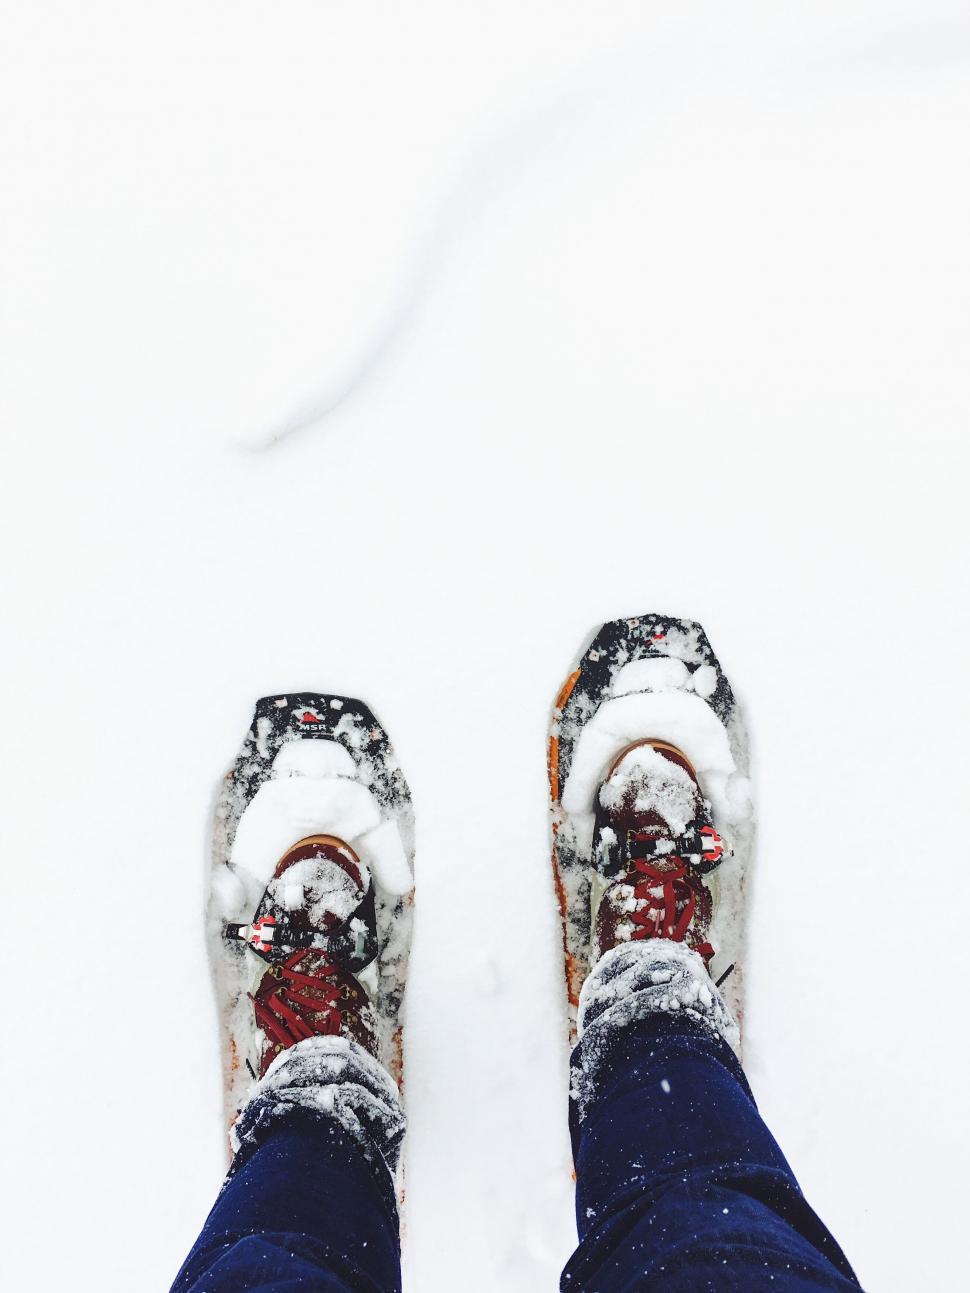 Free Image of Snowshoes on a personal snowy adventure 